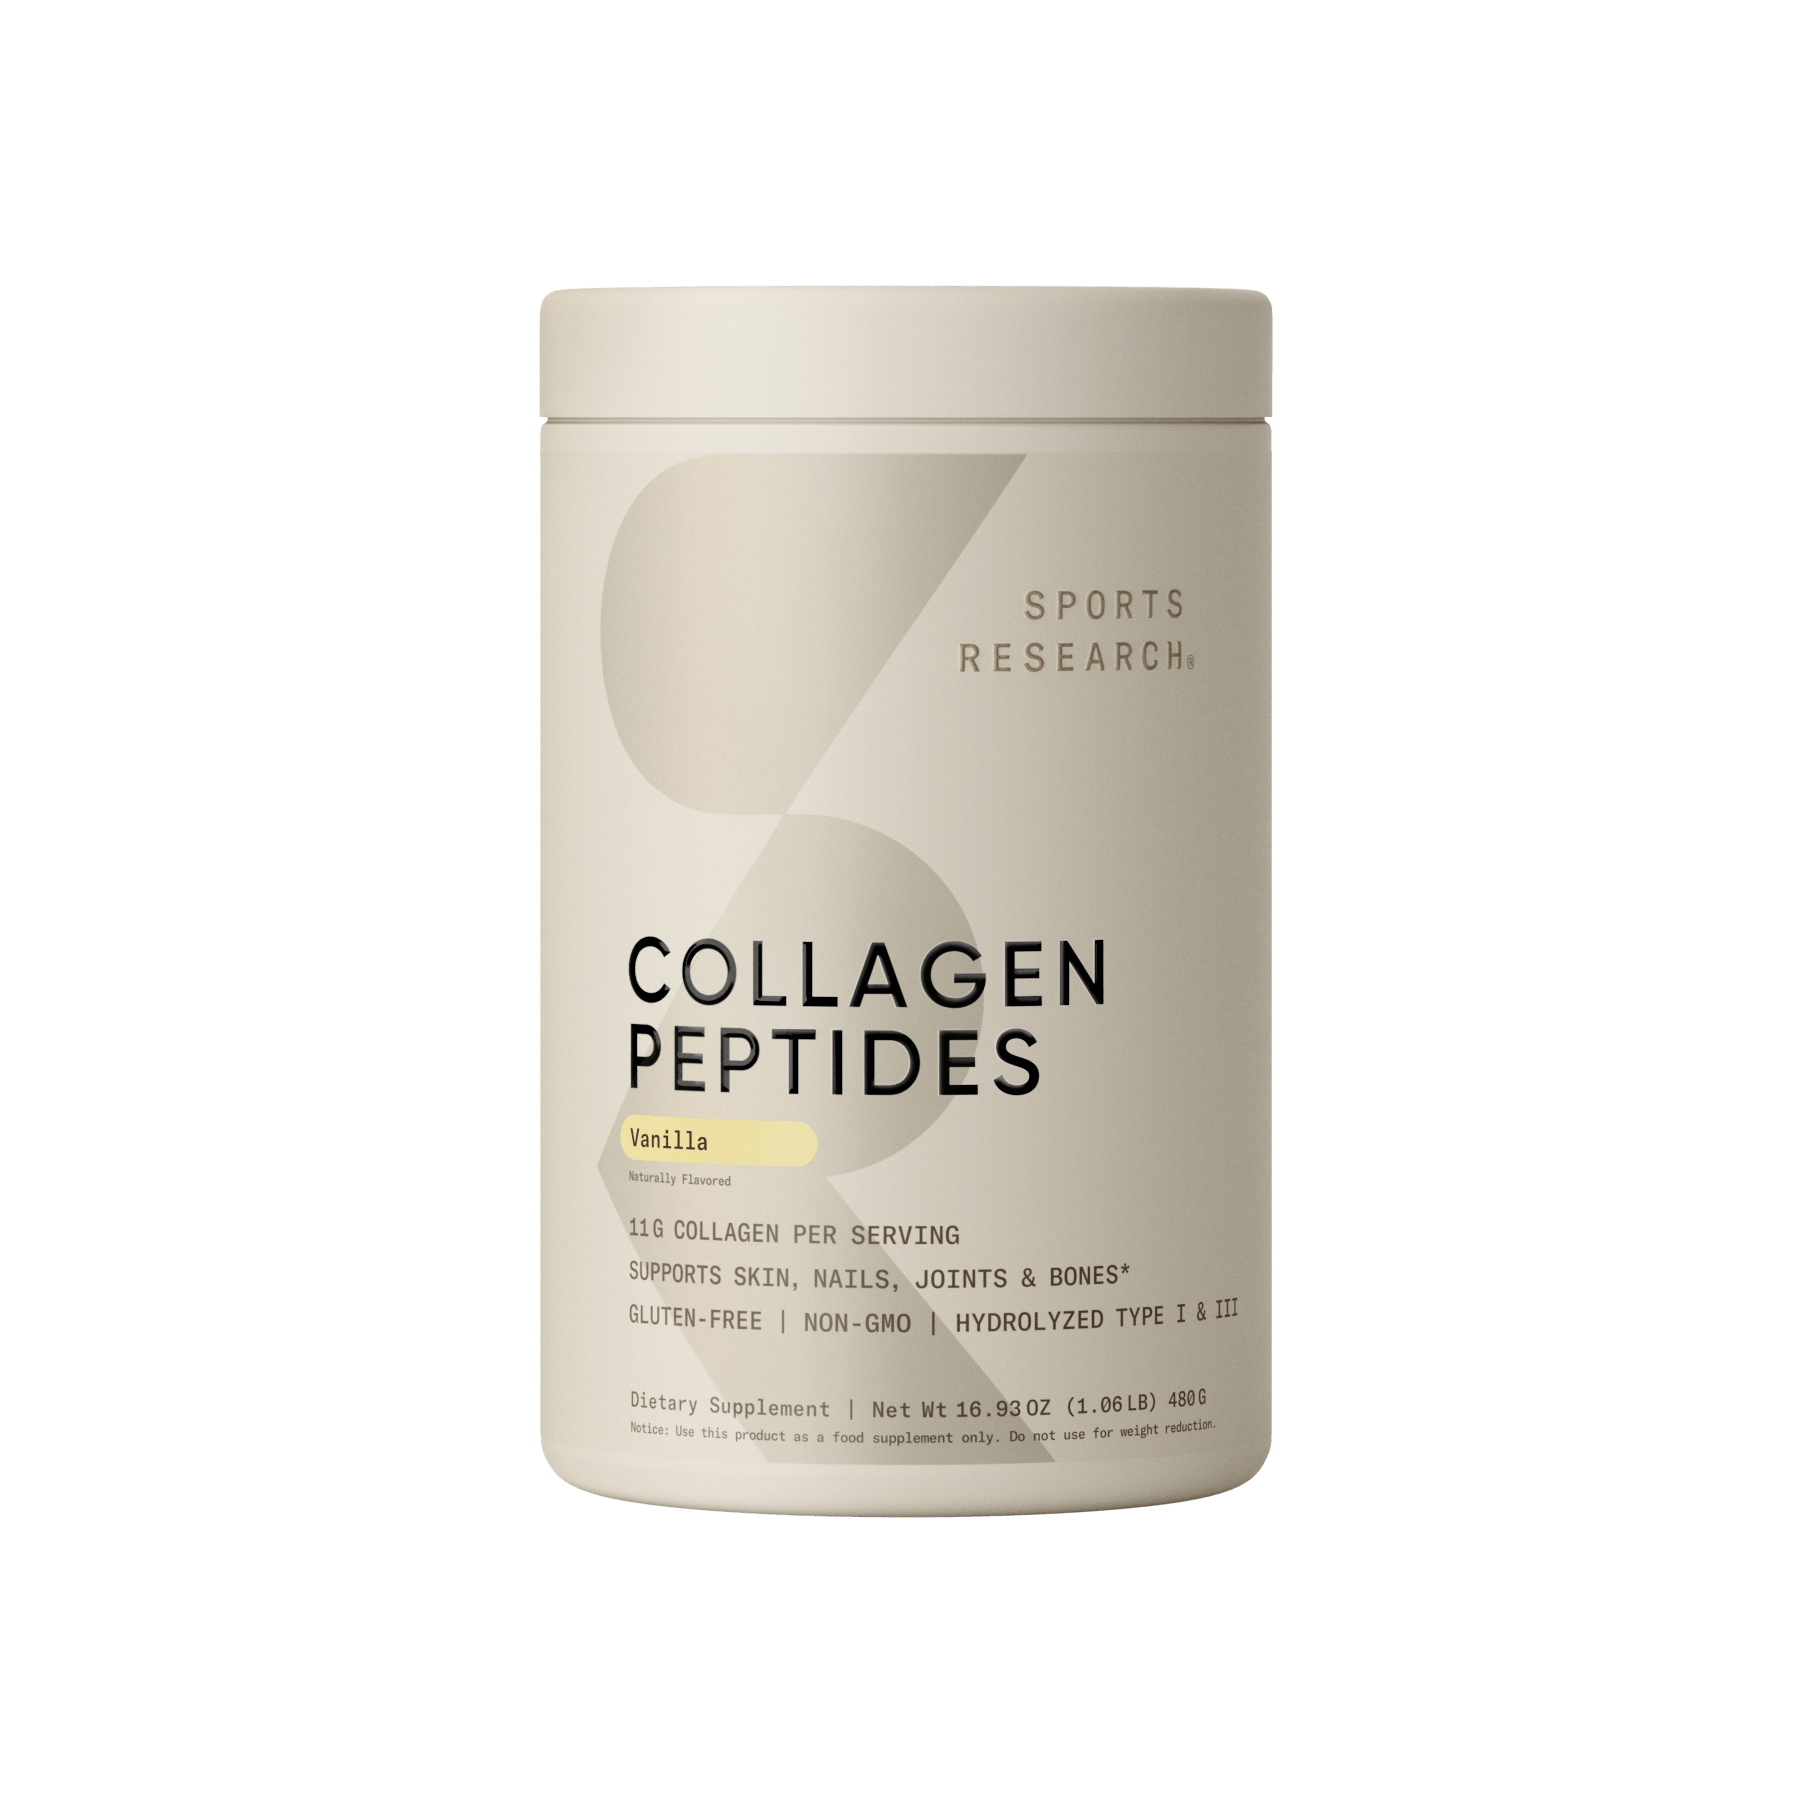 Collagen Peptides - Flavored by Sports Research, sports nutrition.